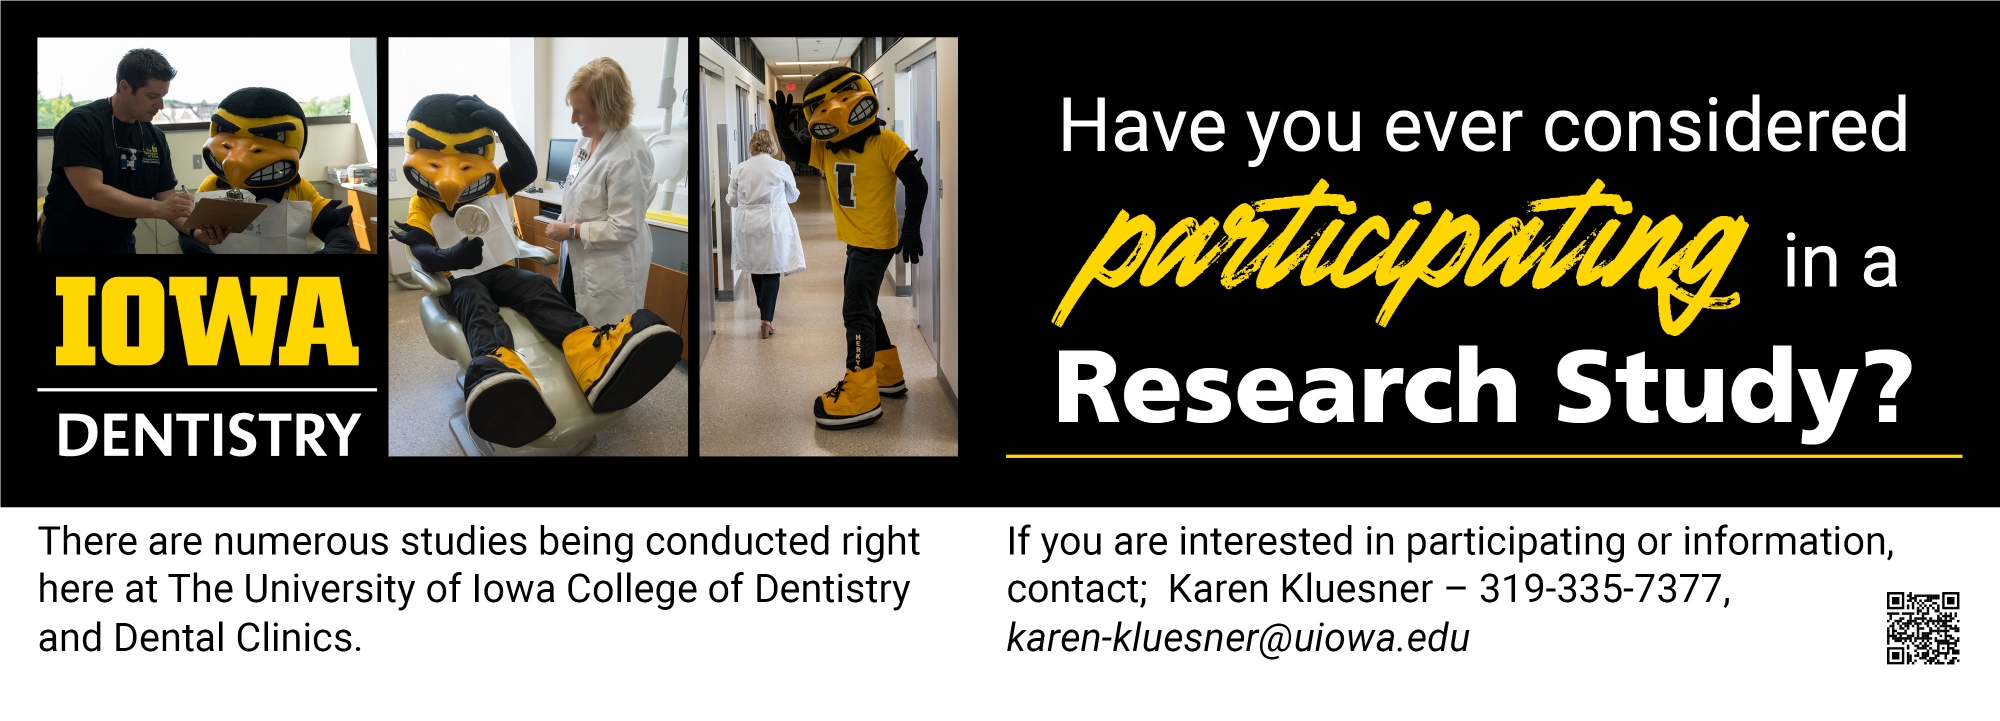 Dental research opportunities